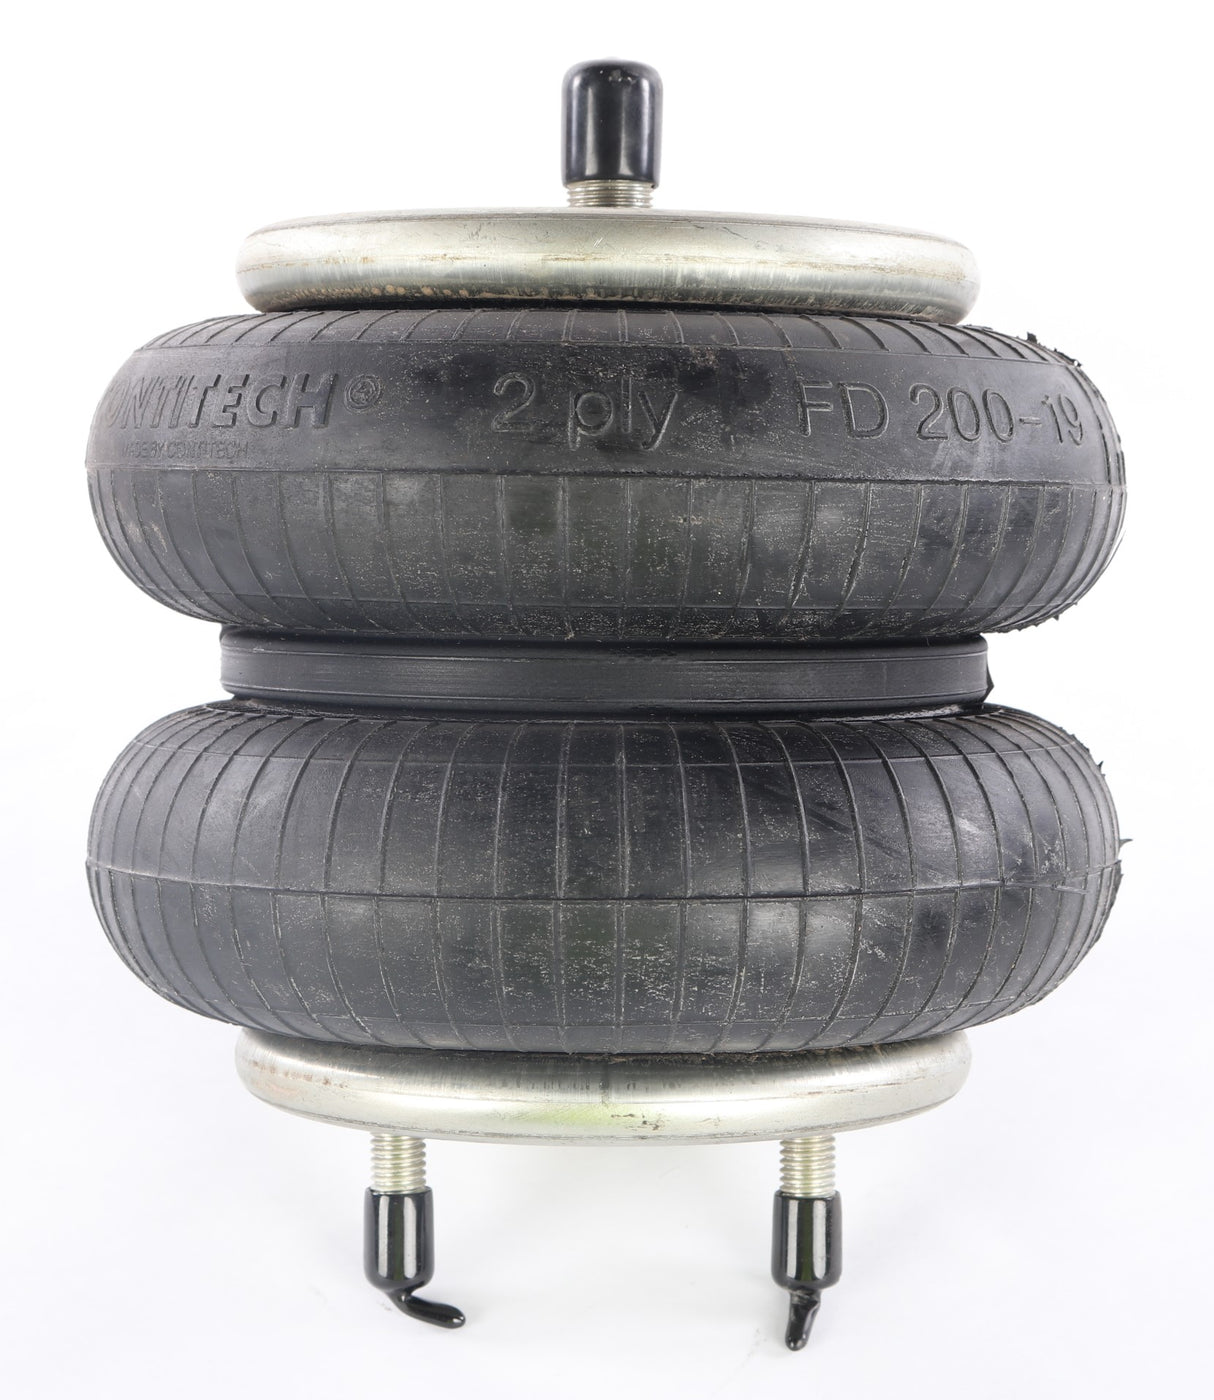 CONTINENTAL AG - CONTITECH/ELITE/GOODYEAR/ROULUNDS ­-­ FD 200-19 450 ­-­ AIR SPRING